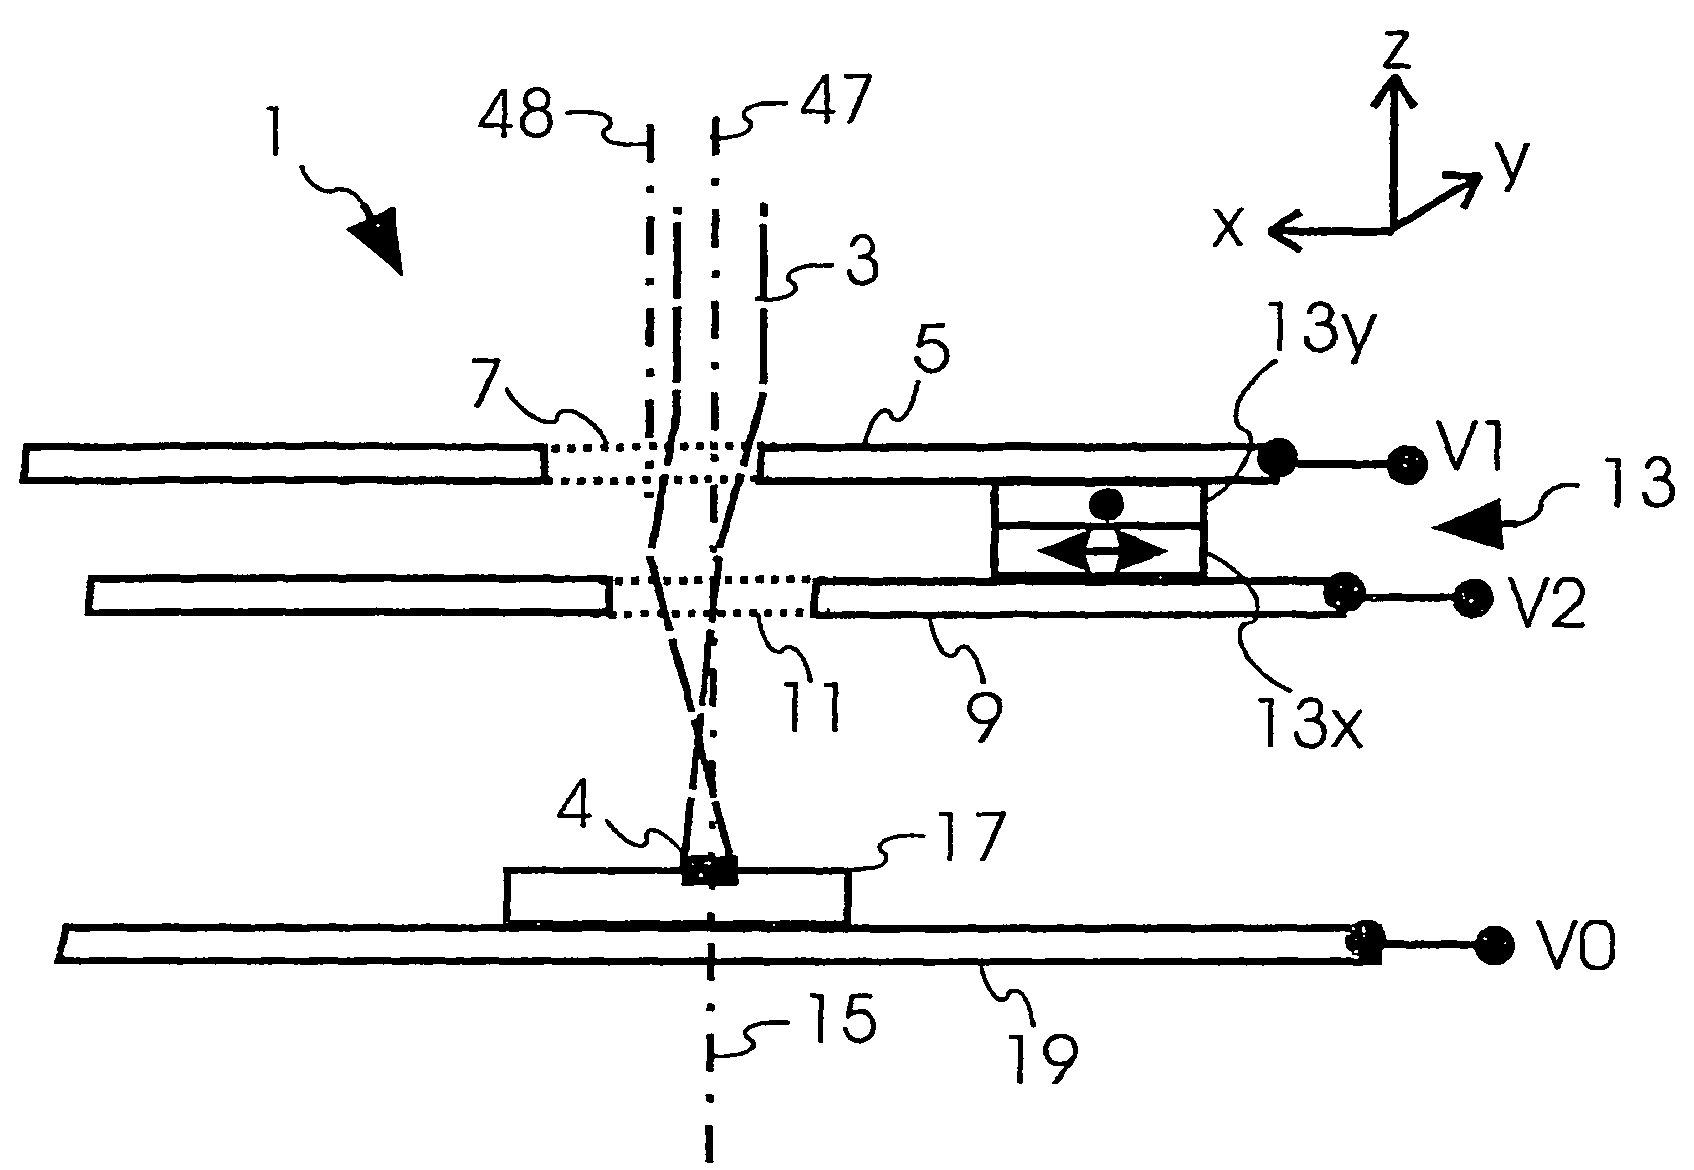 Beam optical component having a charged particle lens